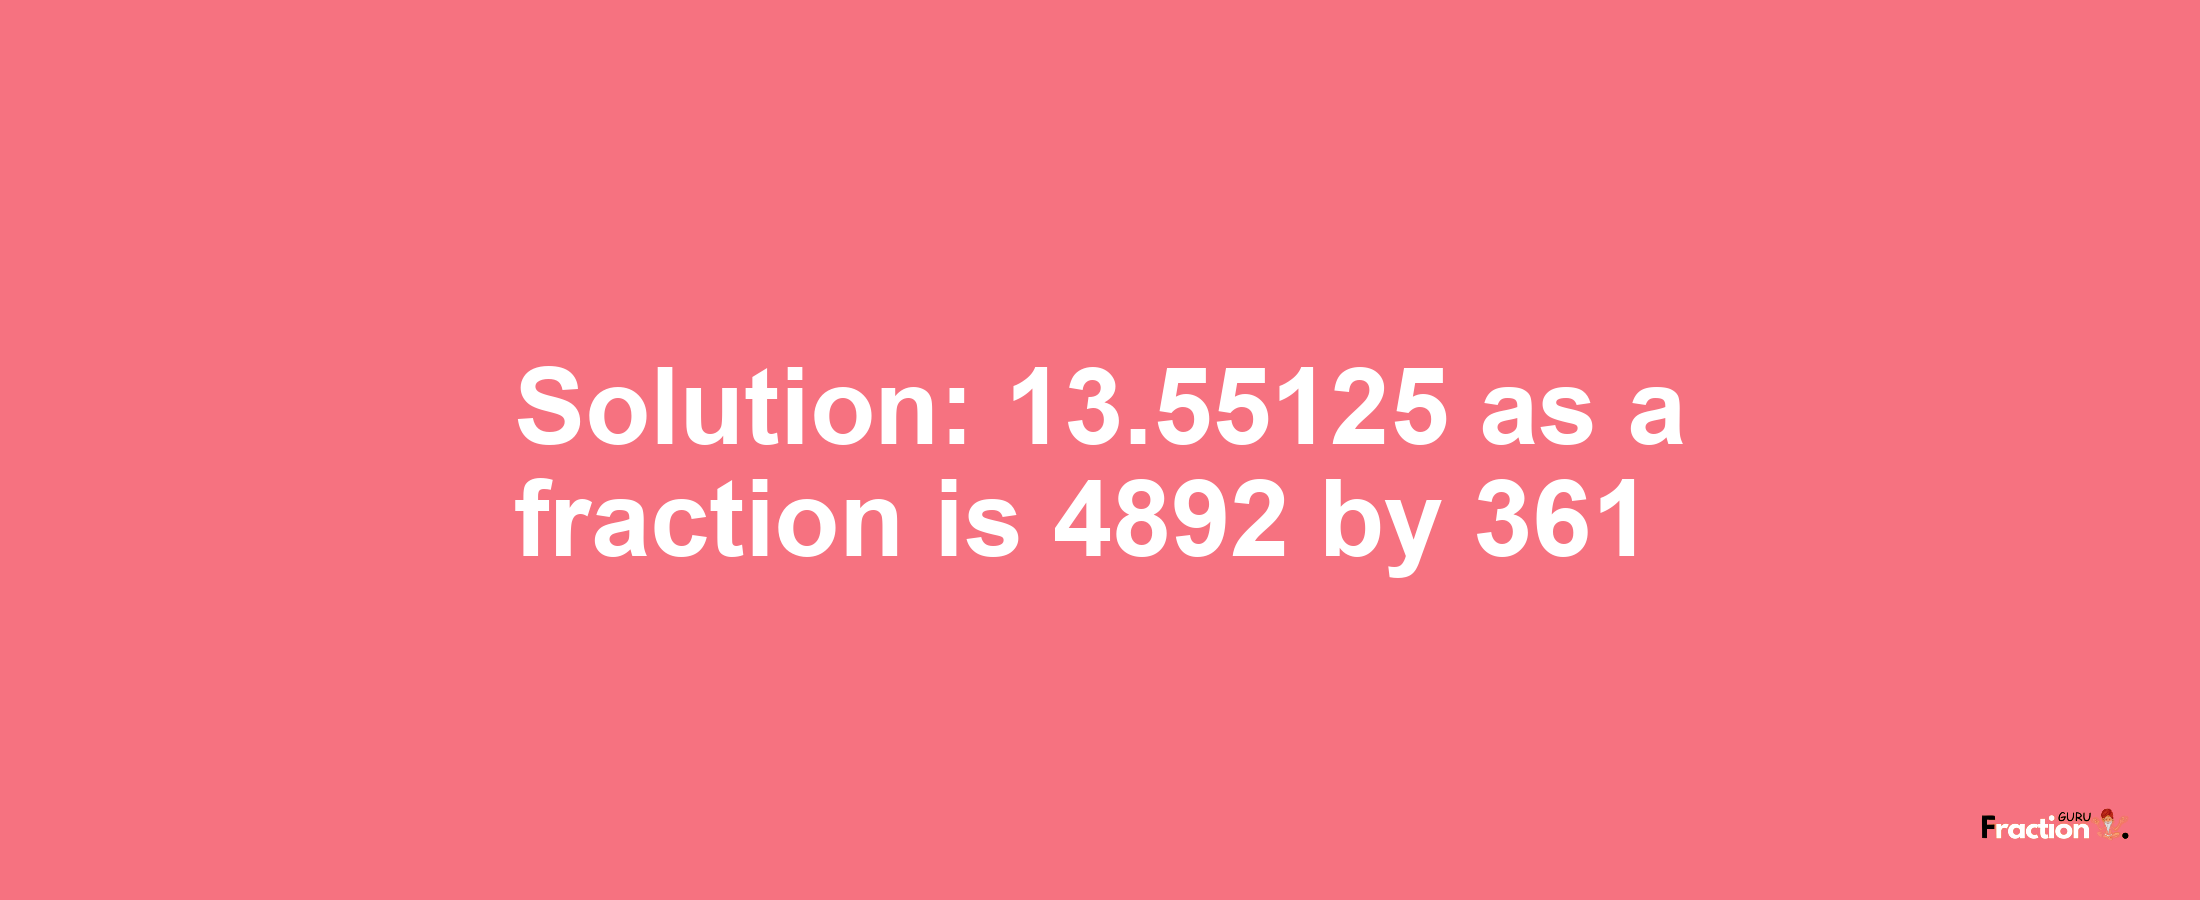 Solution:13.55125 as a fraction is 4892/361